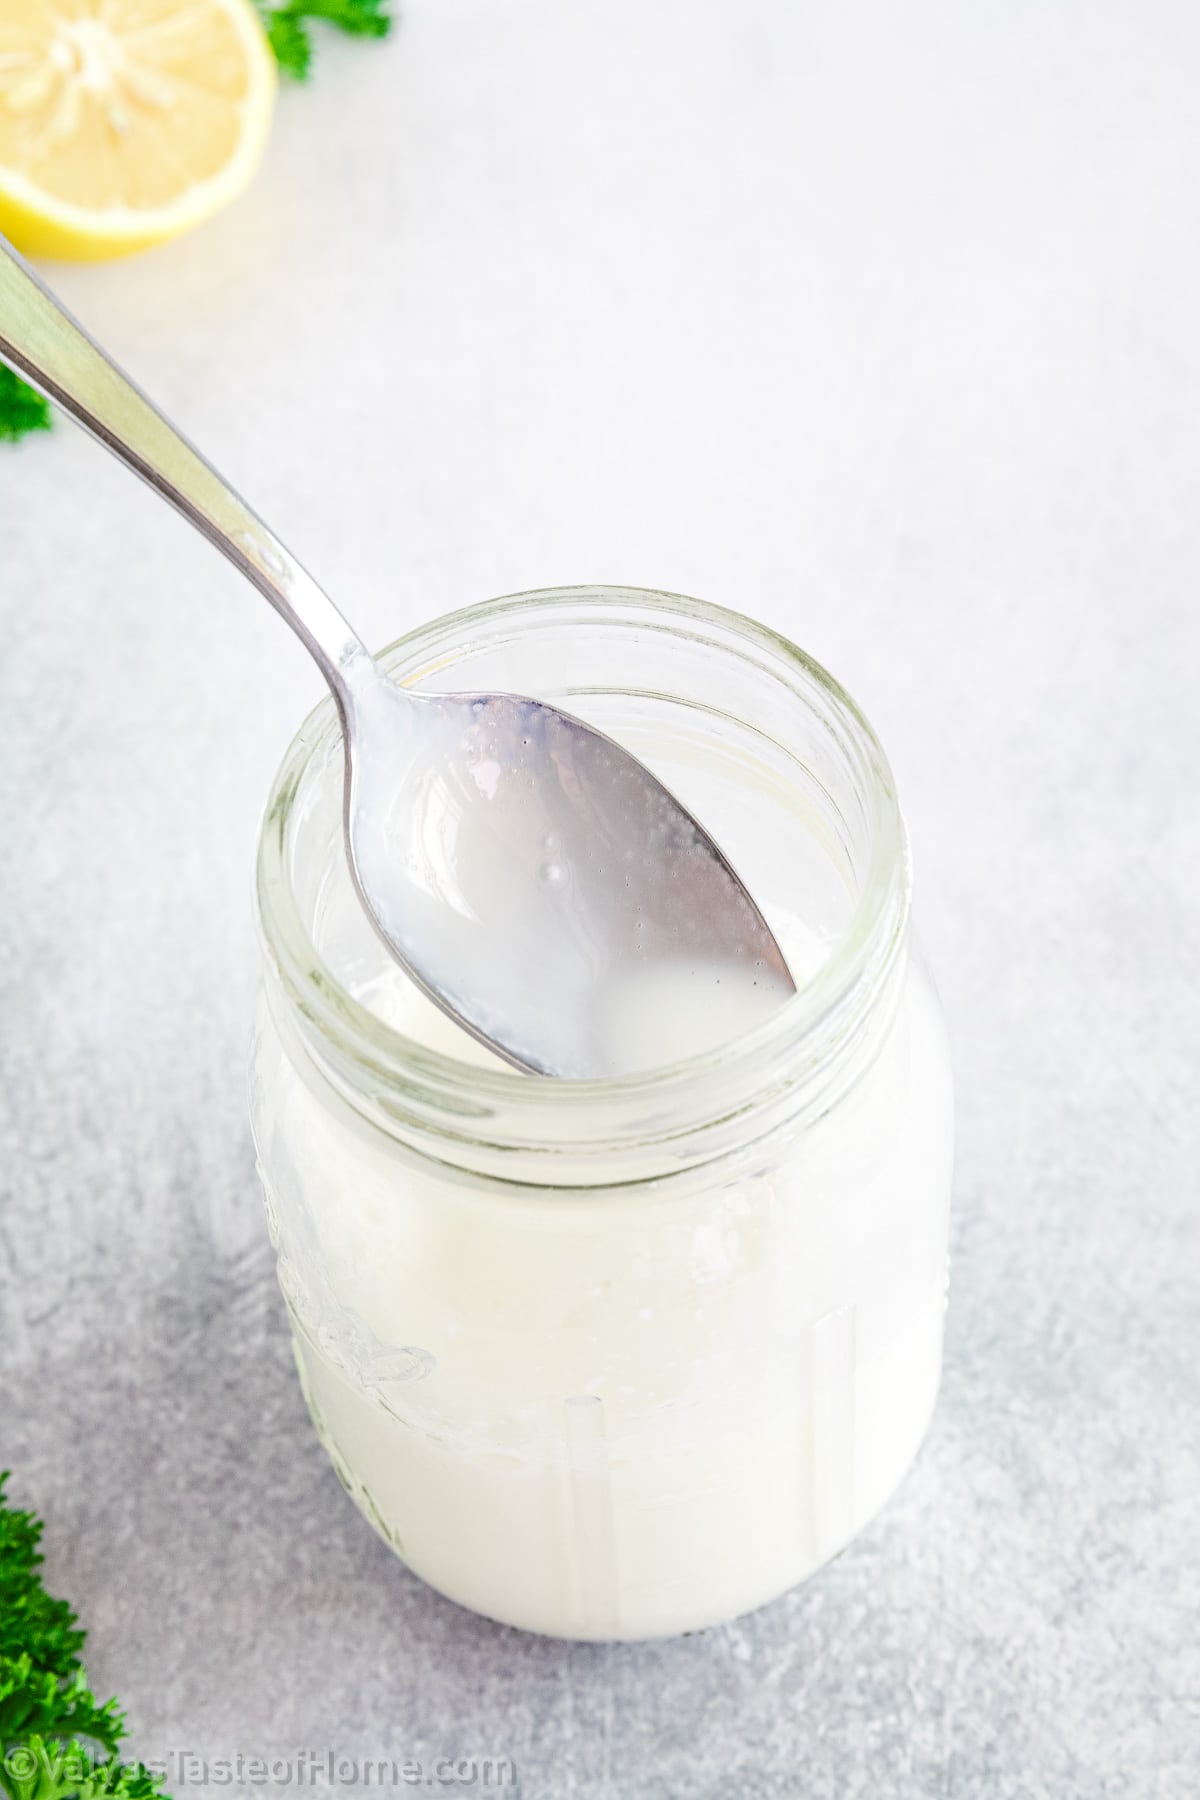 Whether your recipe calls for buttermilk pancakes, buttermilk biscuits, fried chicken, or even a tangy salad dressing, this buttermilk substitute will add that special tangy flavor to all your favorite dishes.